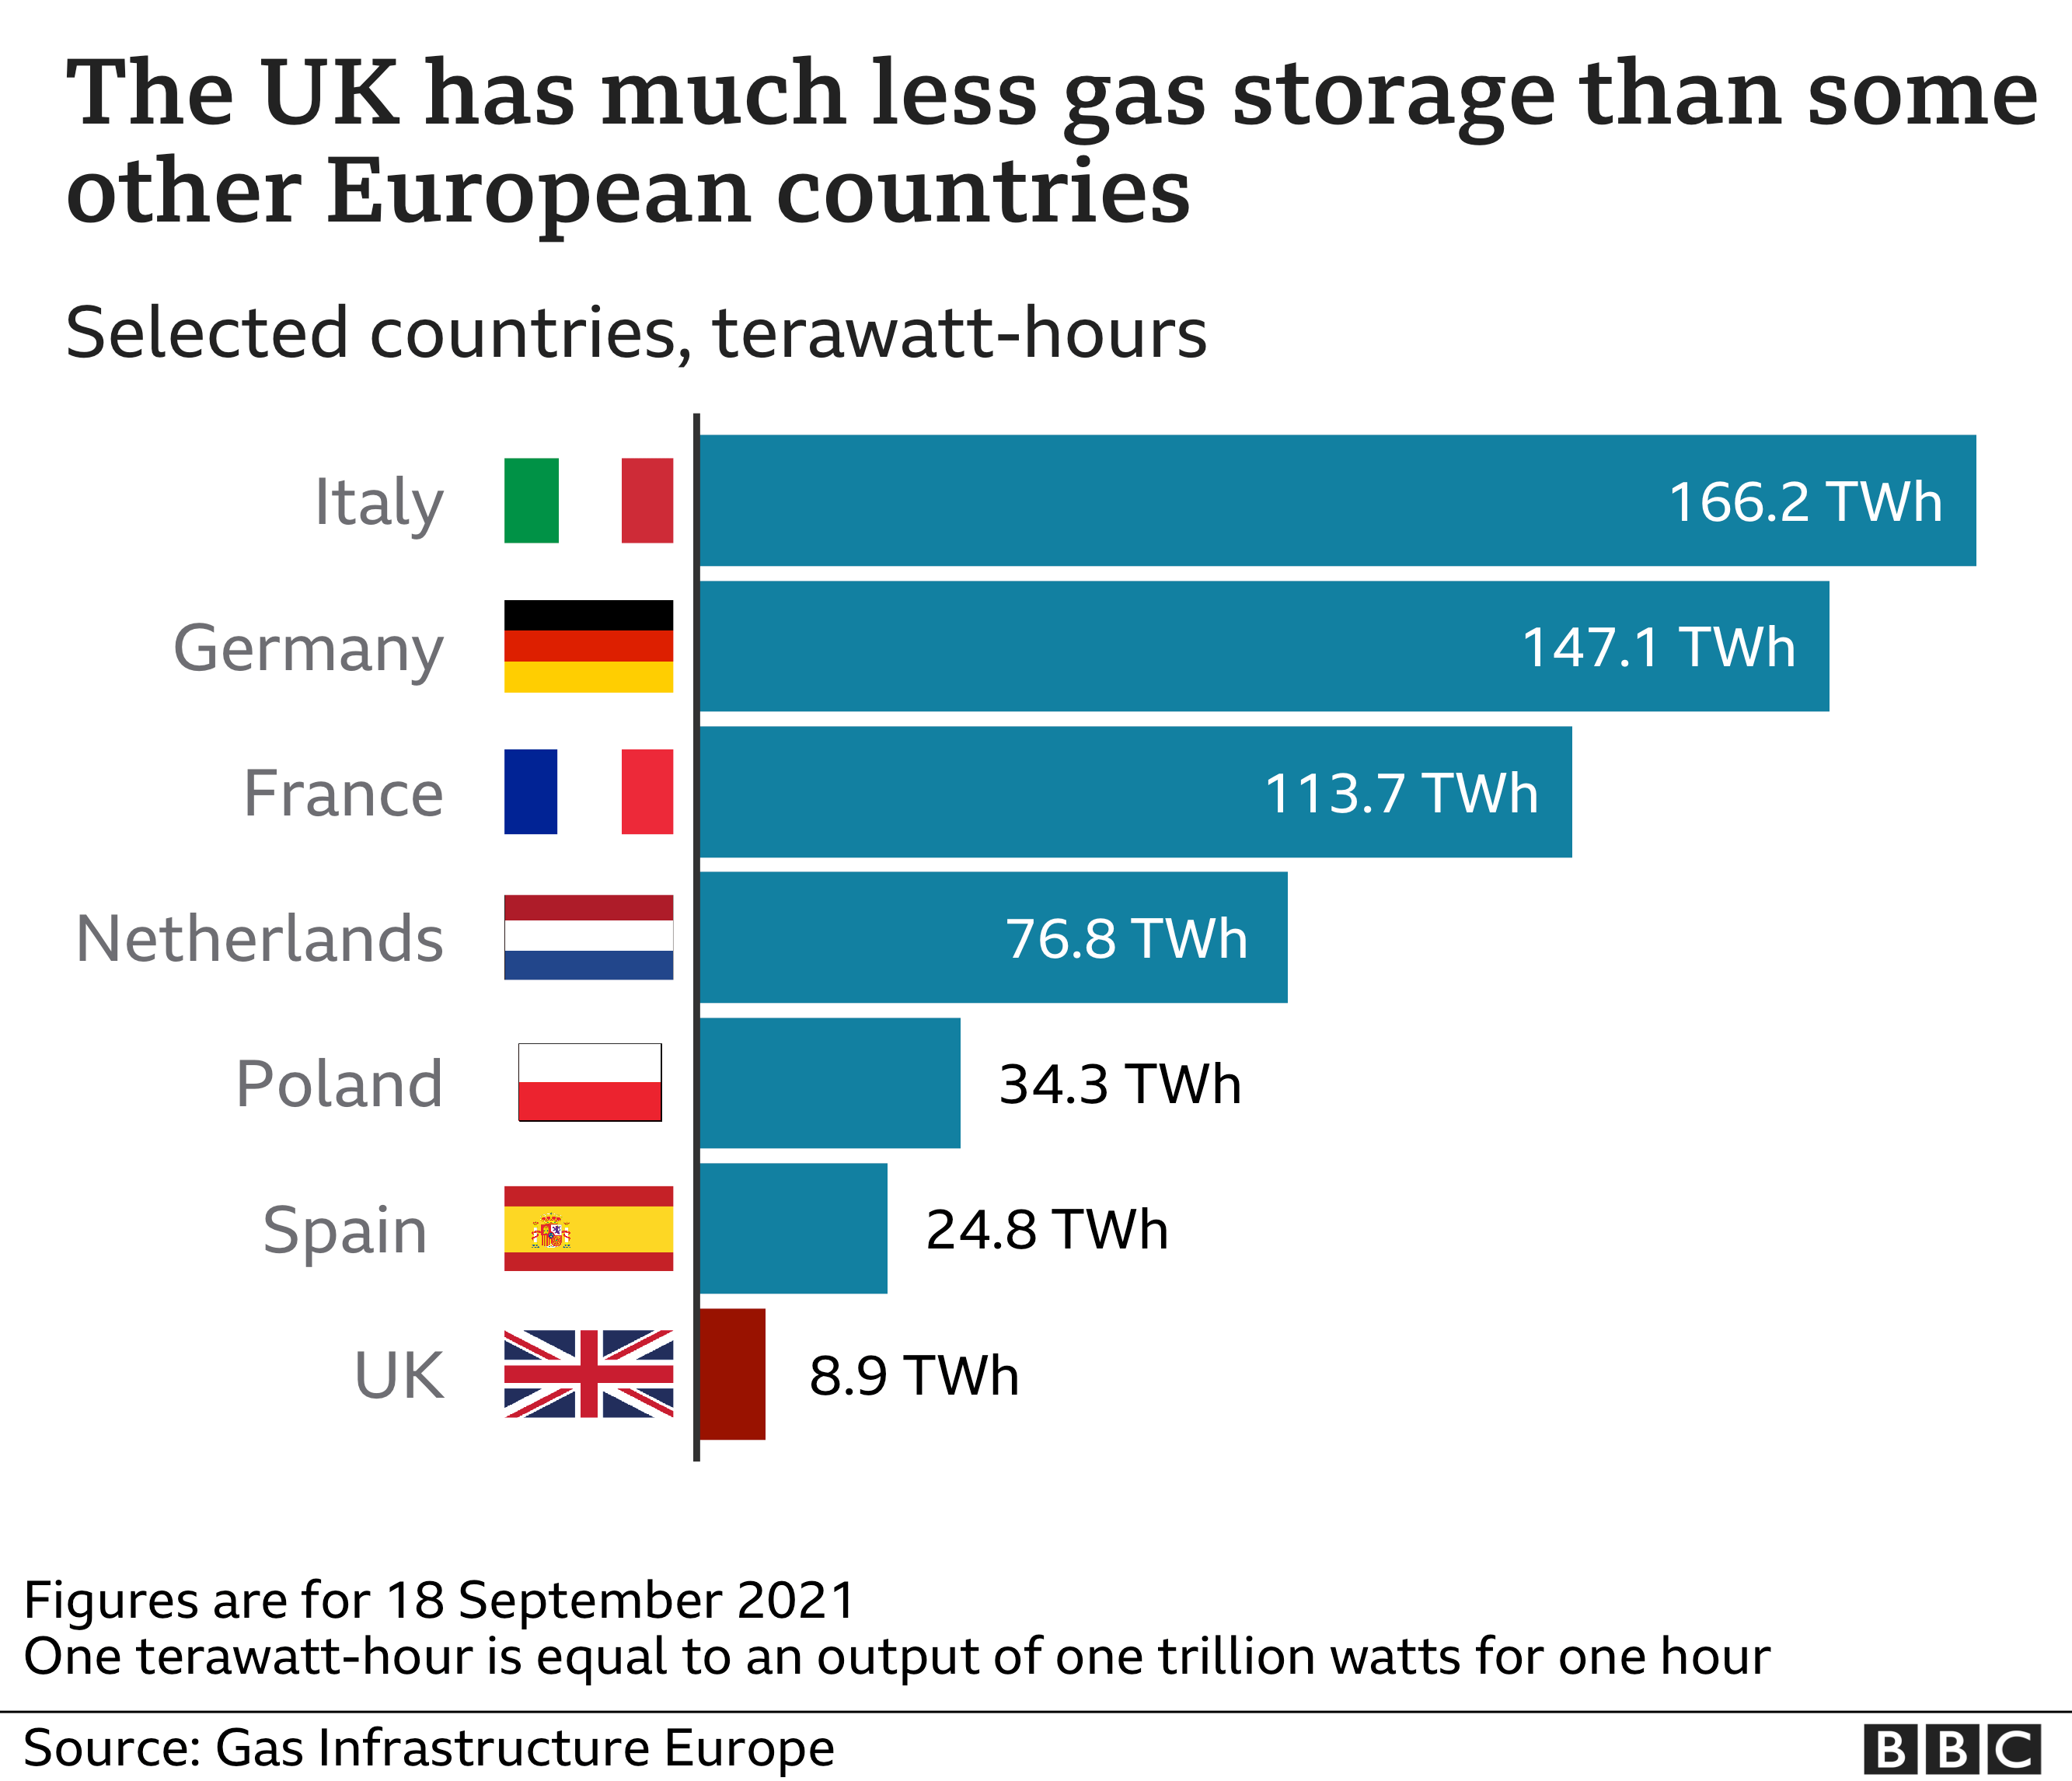 Bar chart: The UK has much less gas storage than other nations in Europe